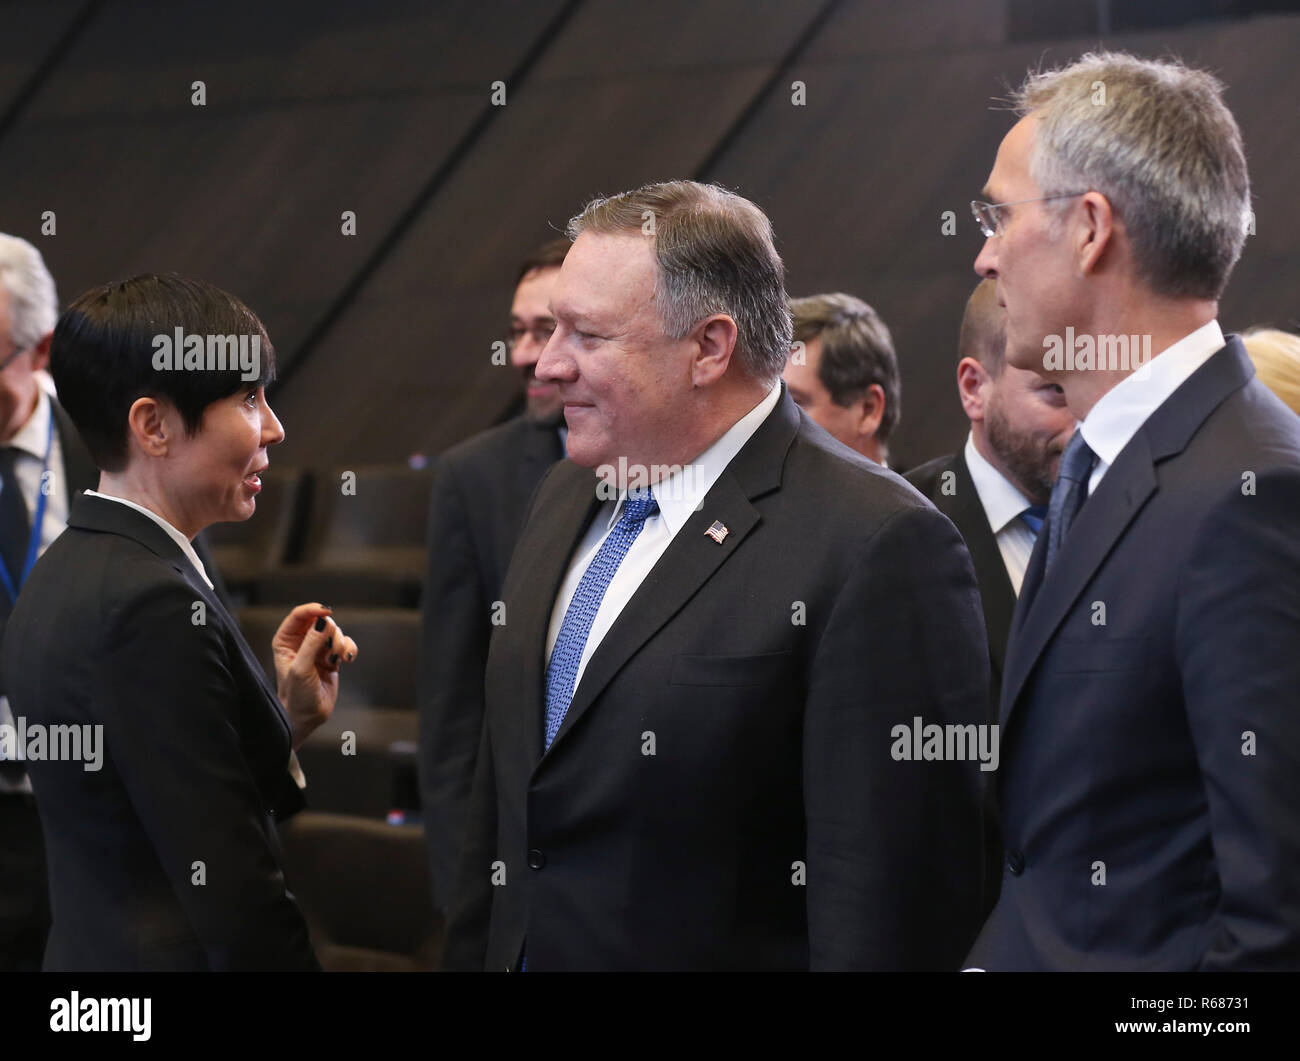 Brussels, Belgium. 4th Dec, 2018. U.S. Secretary of State Mike Pompeo (C) talks with Norwegian Foreign Minister Ine Marie Eriksen Soreide (L) as NATO Secretary General Jens Stoltenberg (R) stands by during a session of the NATO foreign ministers' meeting with their Georgian and Ukrainian counterparts in Brussels, Belgium, Dec. 4, 2018. Credit: Ye Pingfan/Xinhua/Alamy Live News Stock Photo